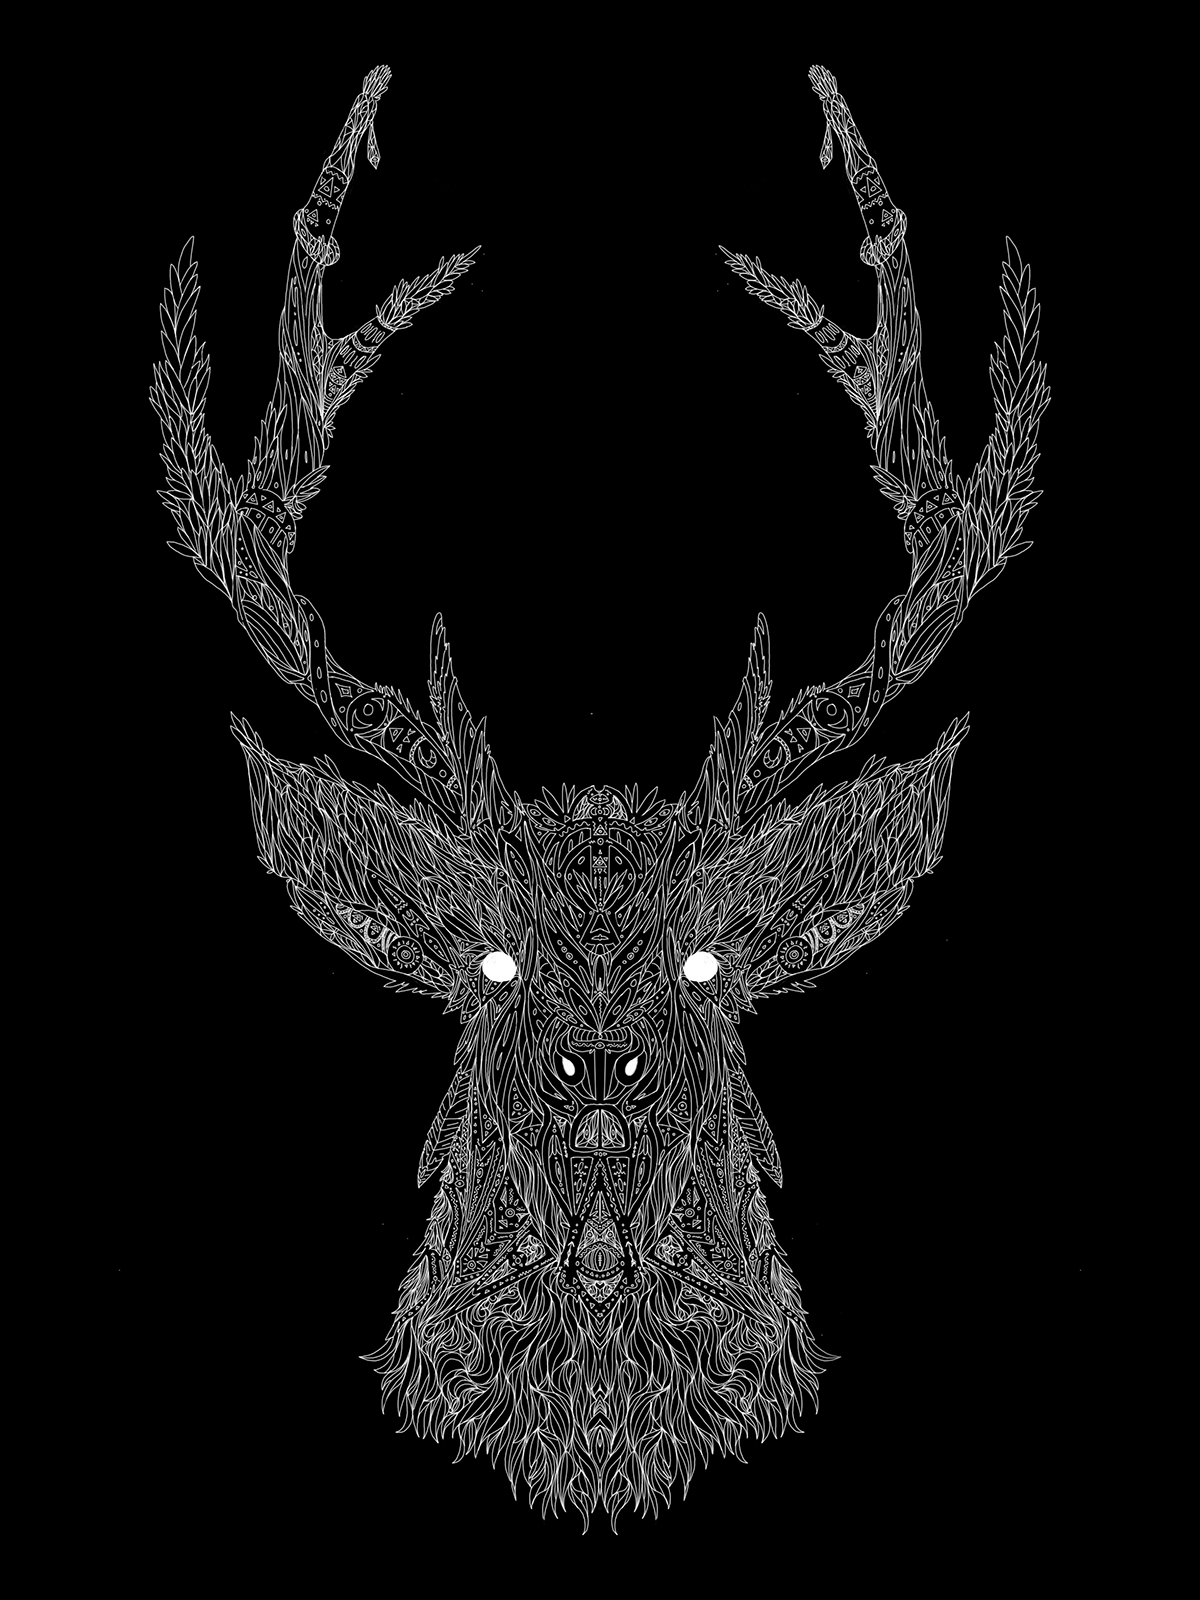 stag photoshop pattern geometry Hipster art details animal creature illuminati gnarly deliciousdesign